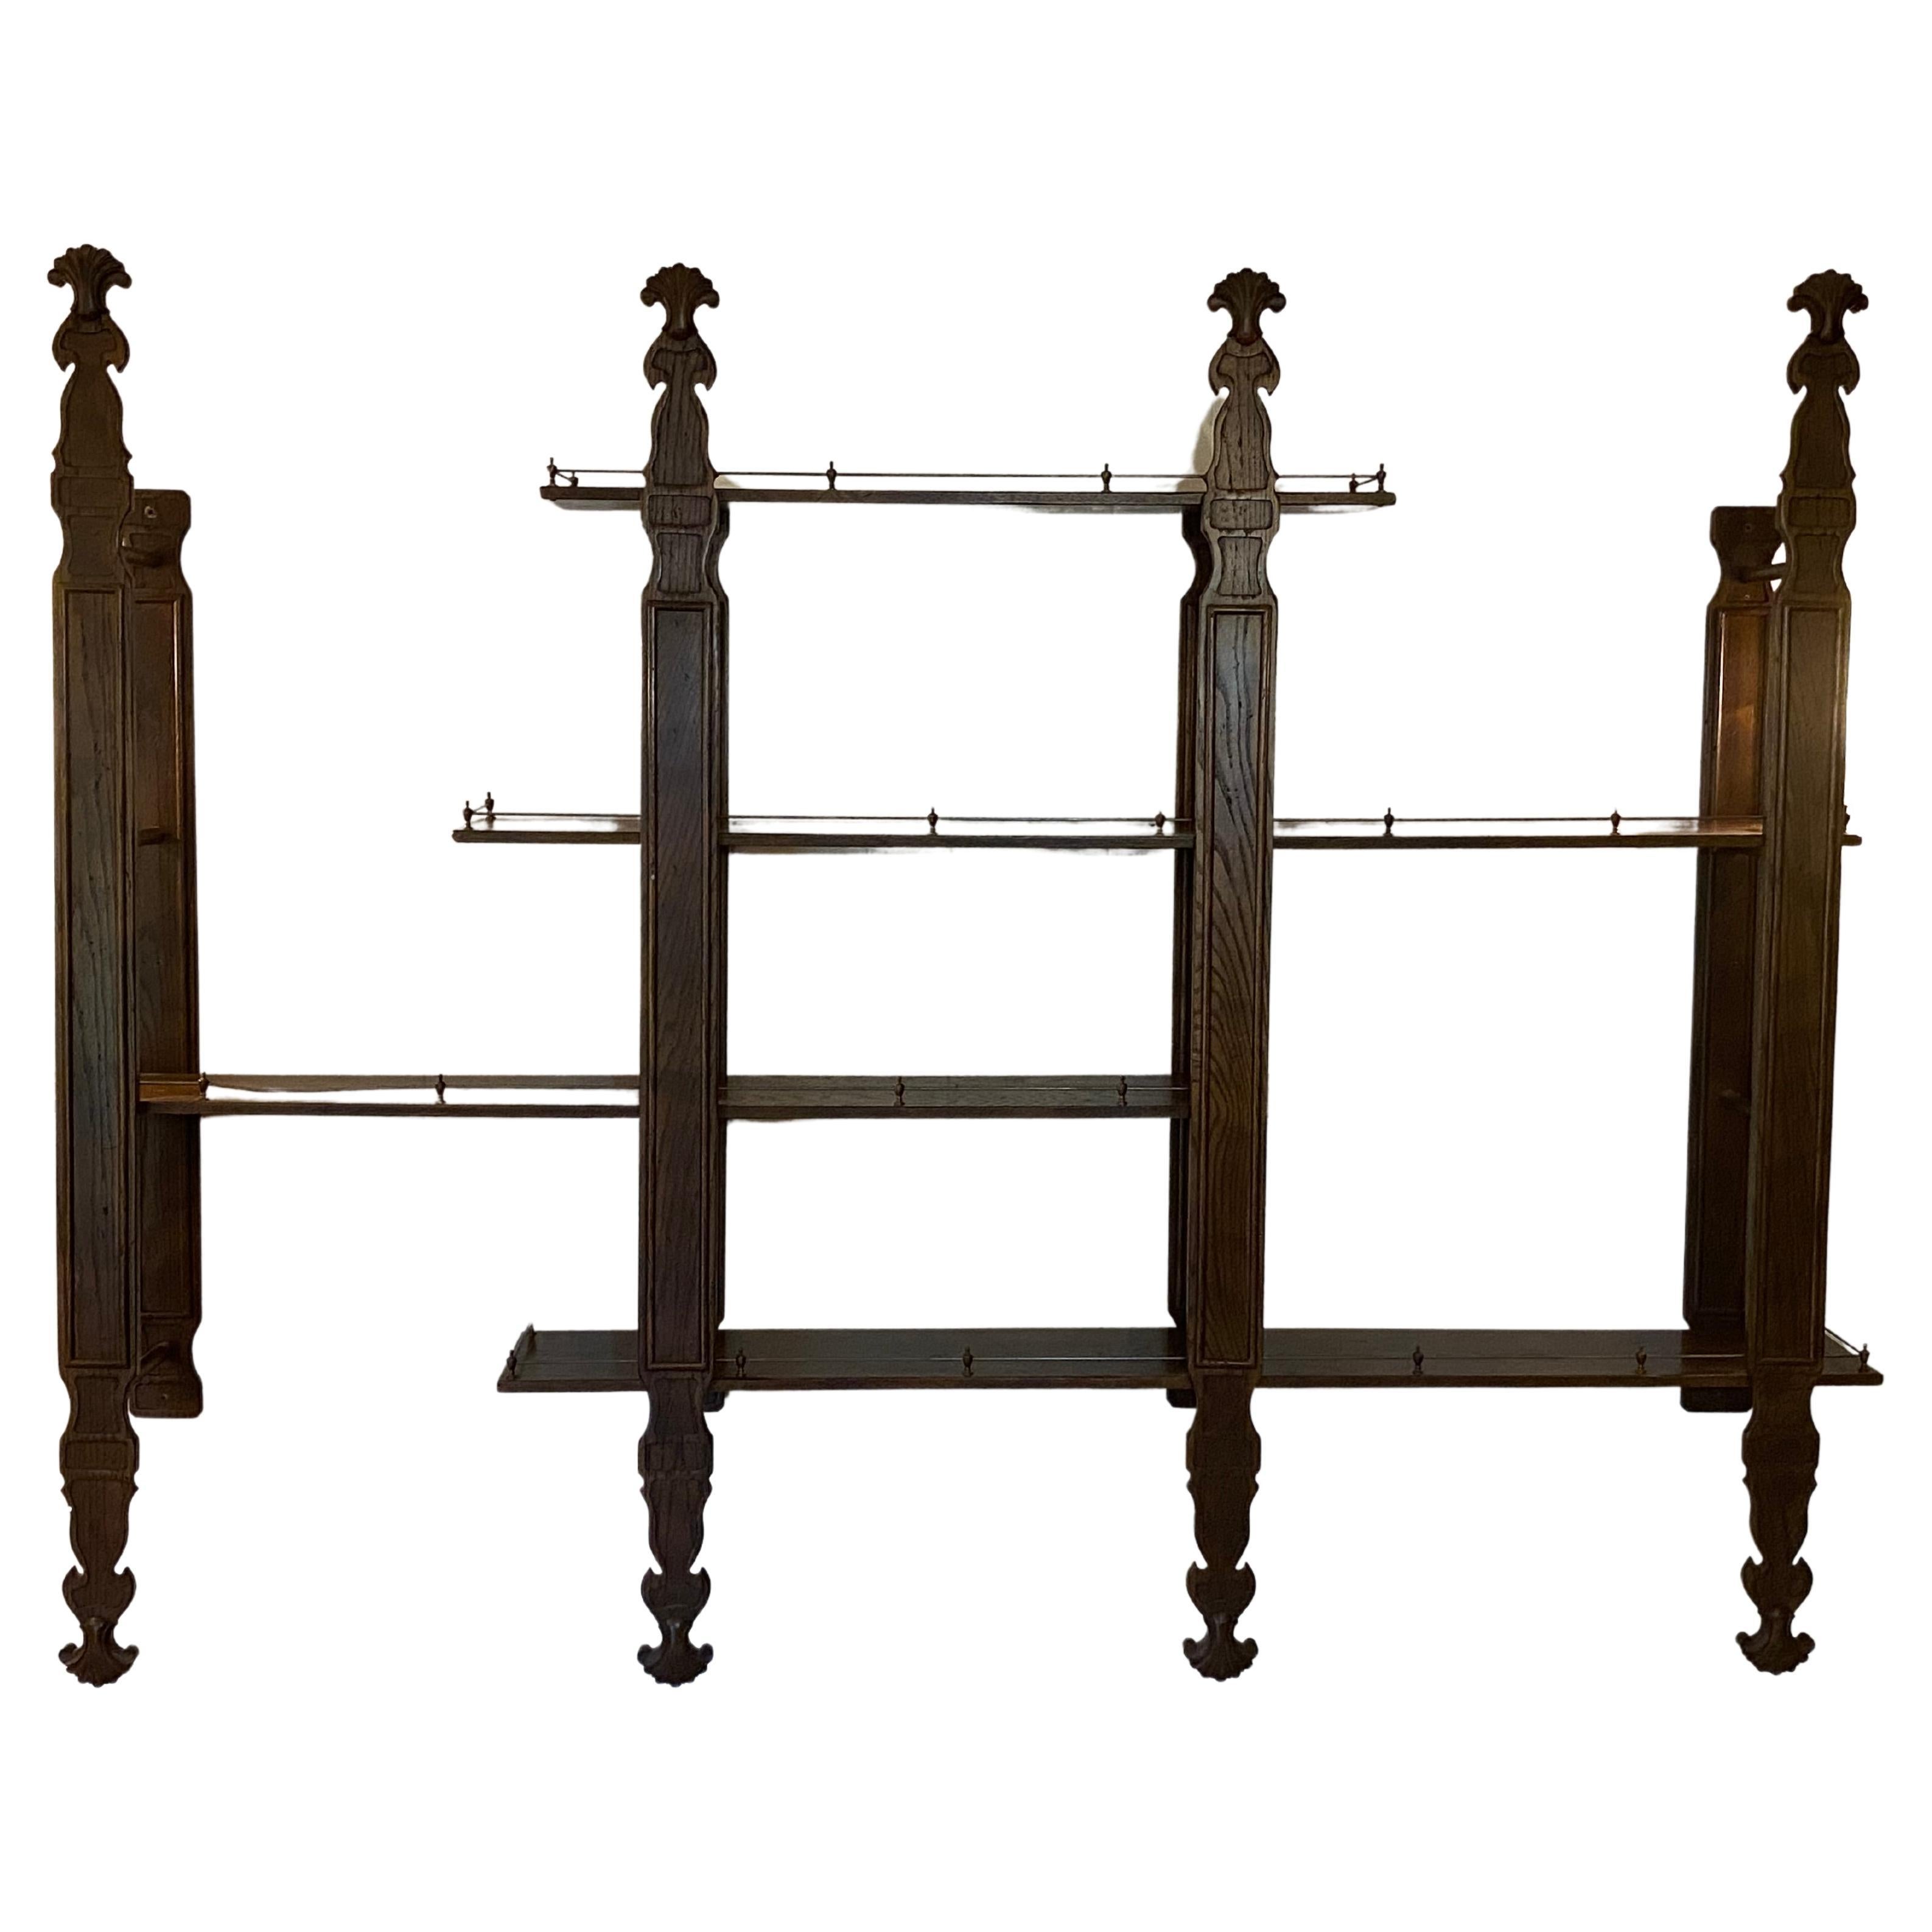 Carved solid oak shelving with brass galleries. Circa 1970. Wall mounted with four vertical brackets. Each shelf can be horizontally adjusted to your specific taste or specifications. Each shelf is loose mounted on top of the horizontal dowel. The